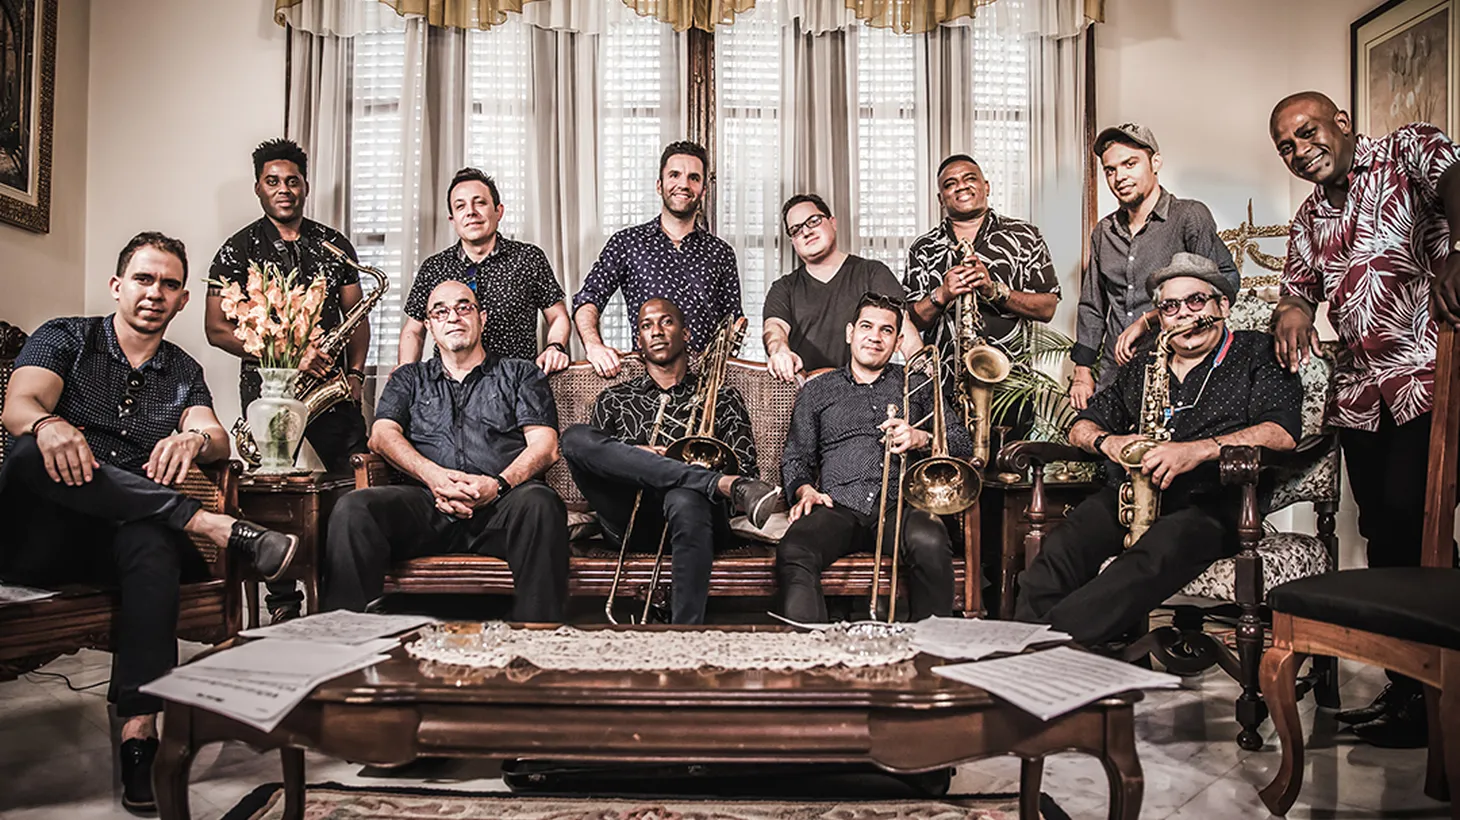 Orquesta Akokán is a deeply soulful mambo ensemble straight out of Cuba. Signed to famed Brooklyn label Daptone Records, the band’s high energy music is both thrilling and timeless.